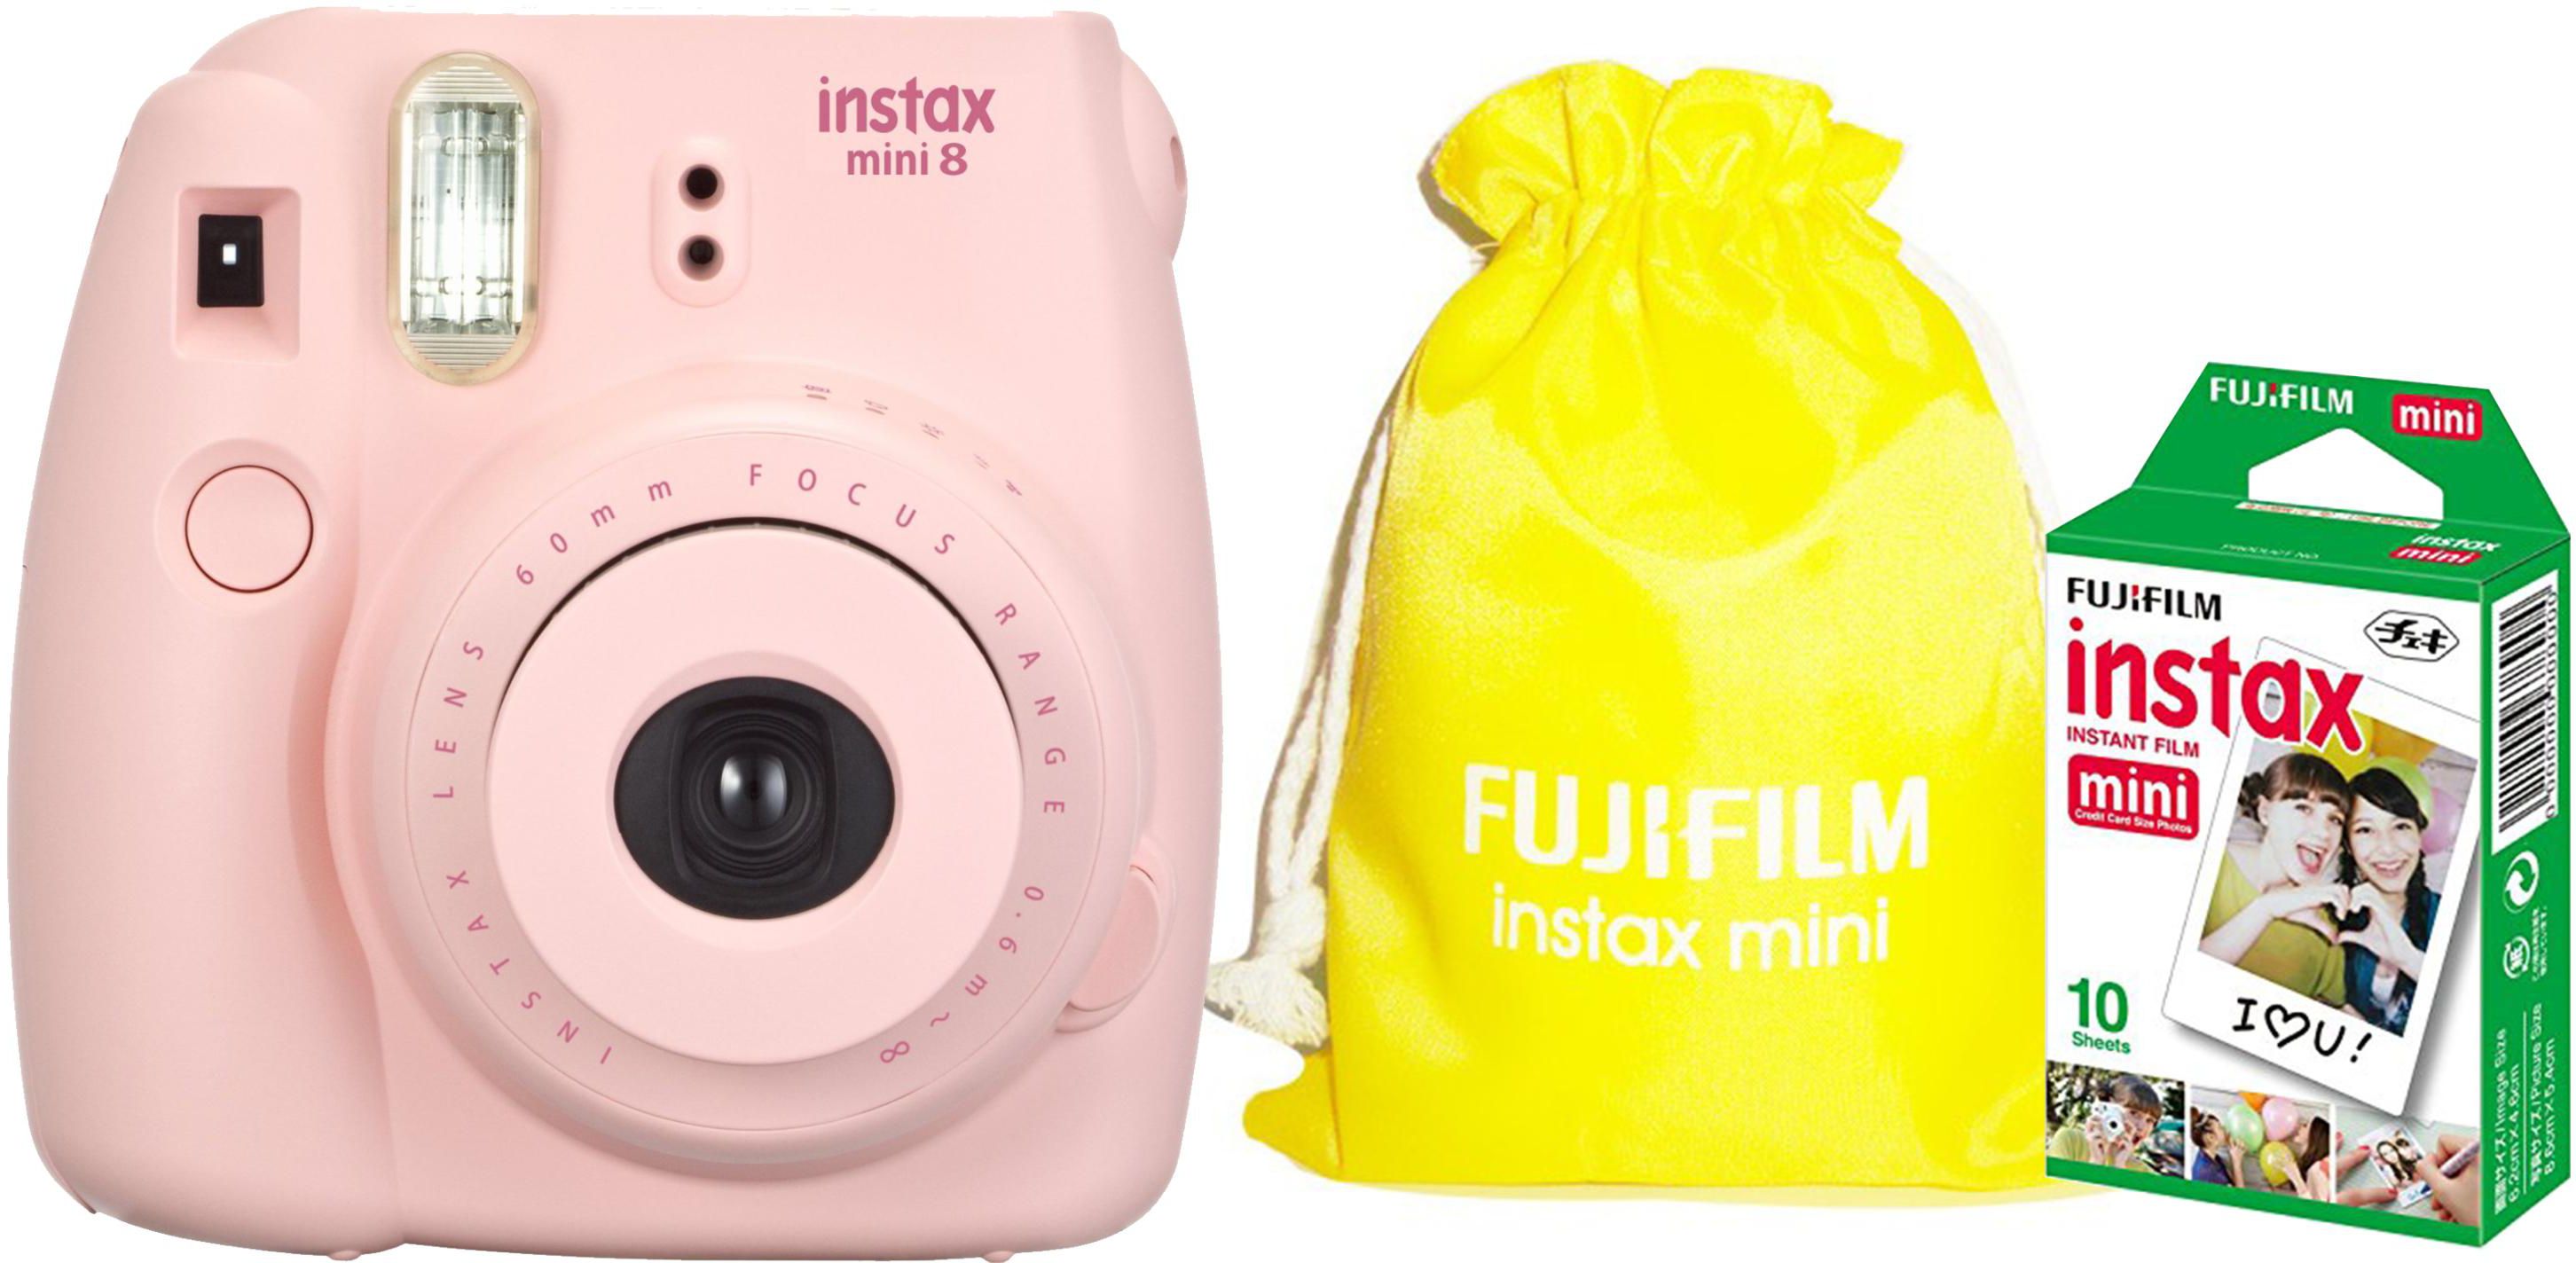 Fujifilm Instax Mini 8 Instant Film Camera Pink with Yellow Pouch and 10 Film Sheet